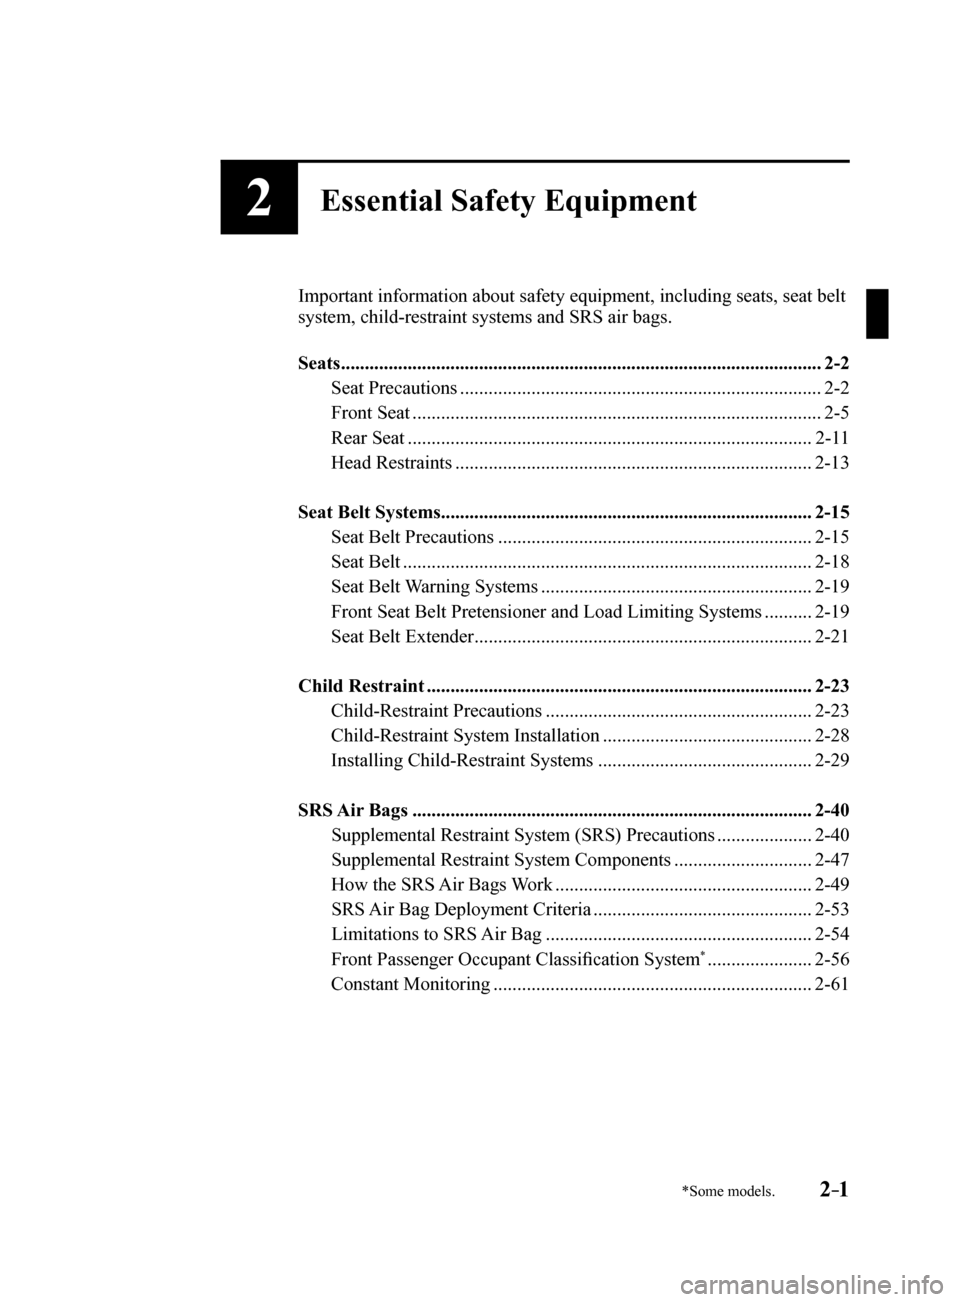 MAZDA MODEL 6 2017  Owners Manual (in English) 2–1*Some models.
2Essential Safety Equipment
Important information about safety equipment, including seats, seat belt 
system, child-restraint systems and SRS air bags.
Seats .......................